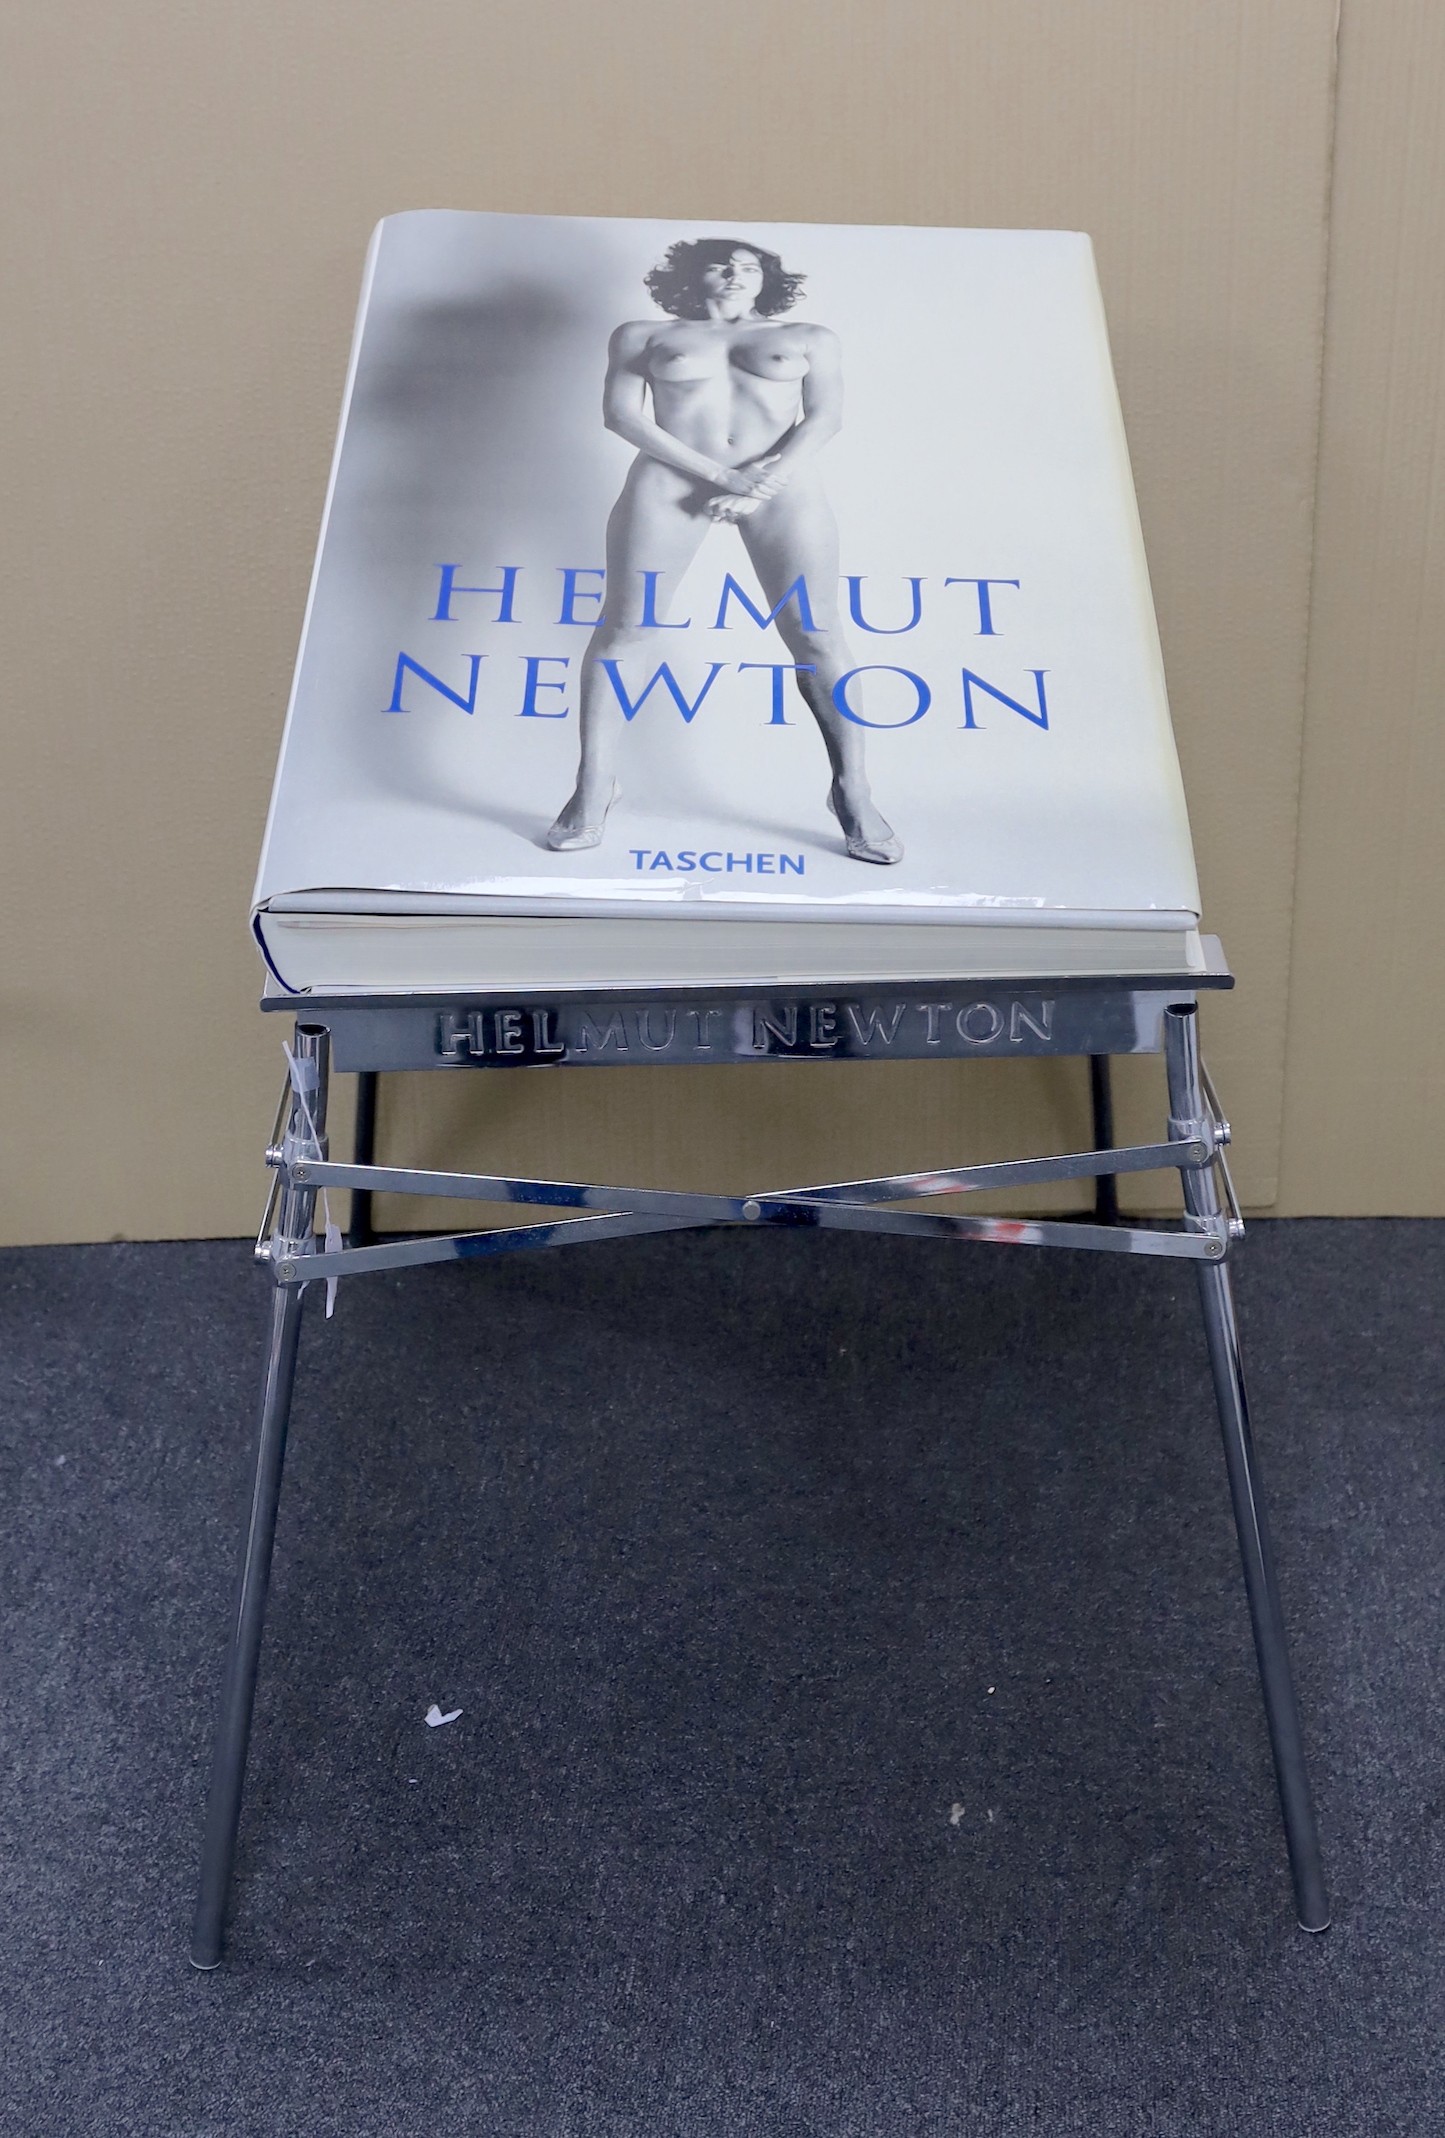 Newton, Helmut - Sumo, one of 10,000, signed, folio, original cloth in d/j, with 464 pp., 400 plates, Taschen, Monte Carlo, 1999, with chrome stand designed by Philippe Starck, together with original shipping box.